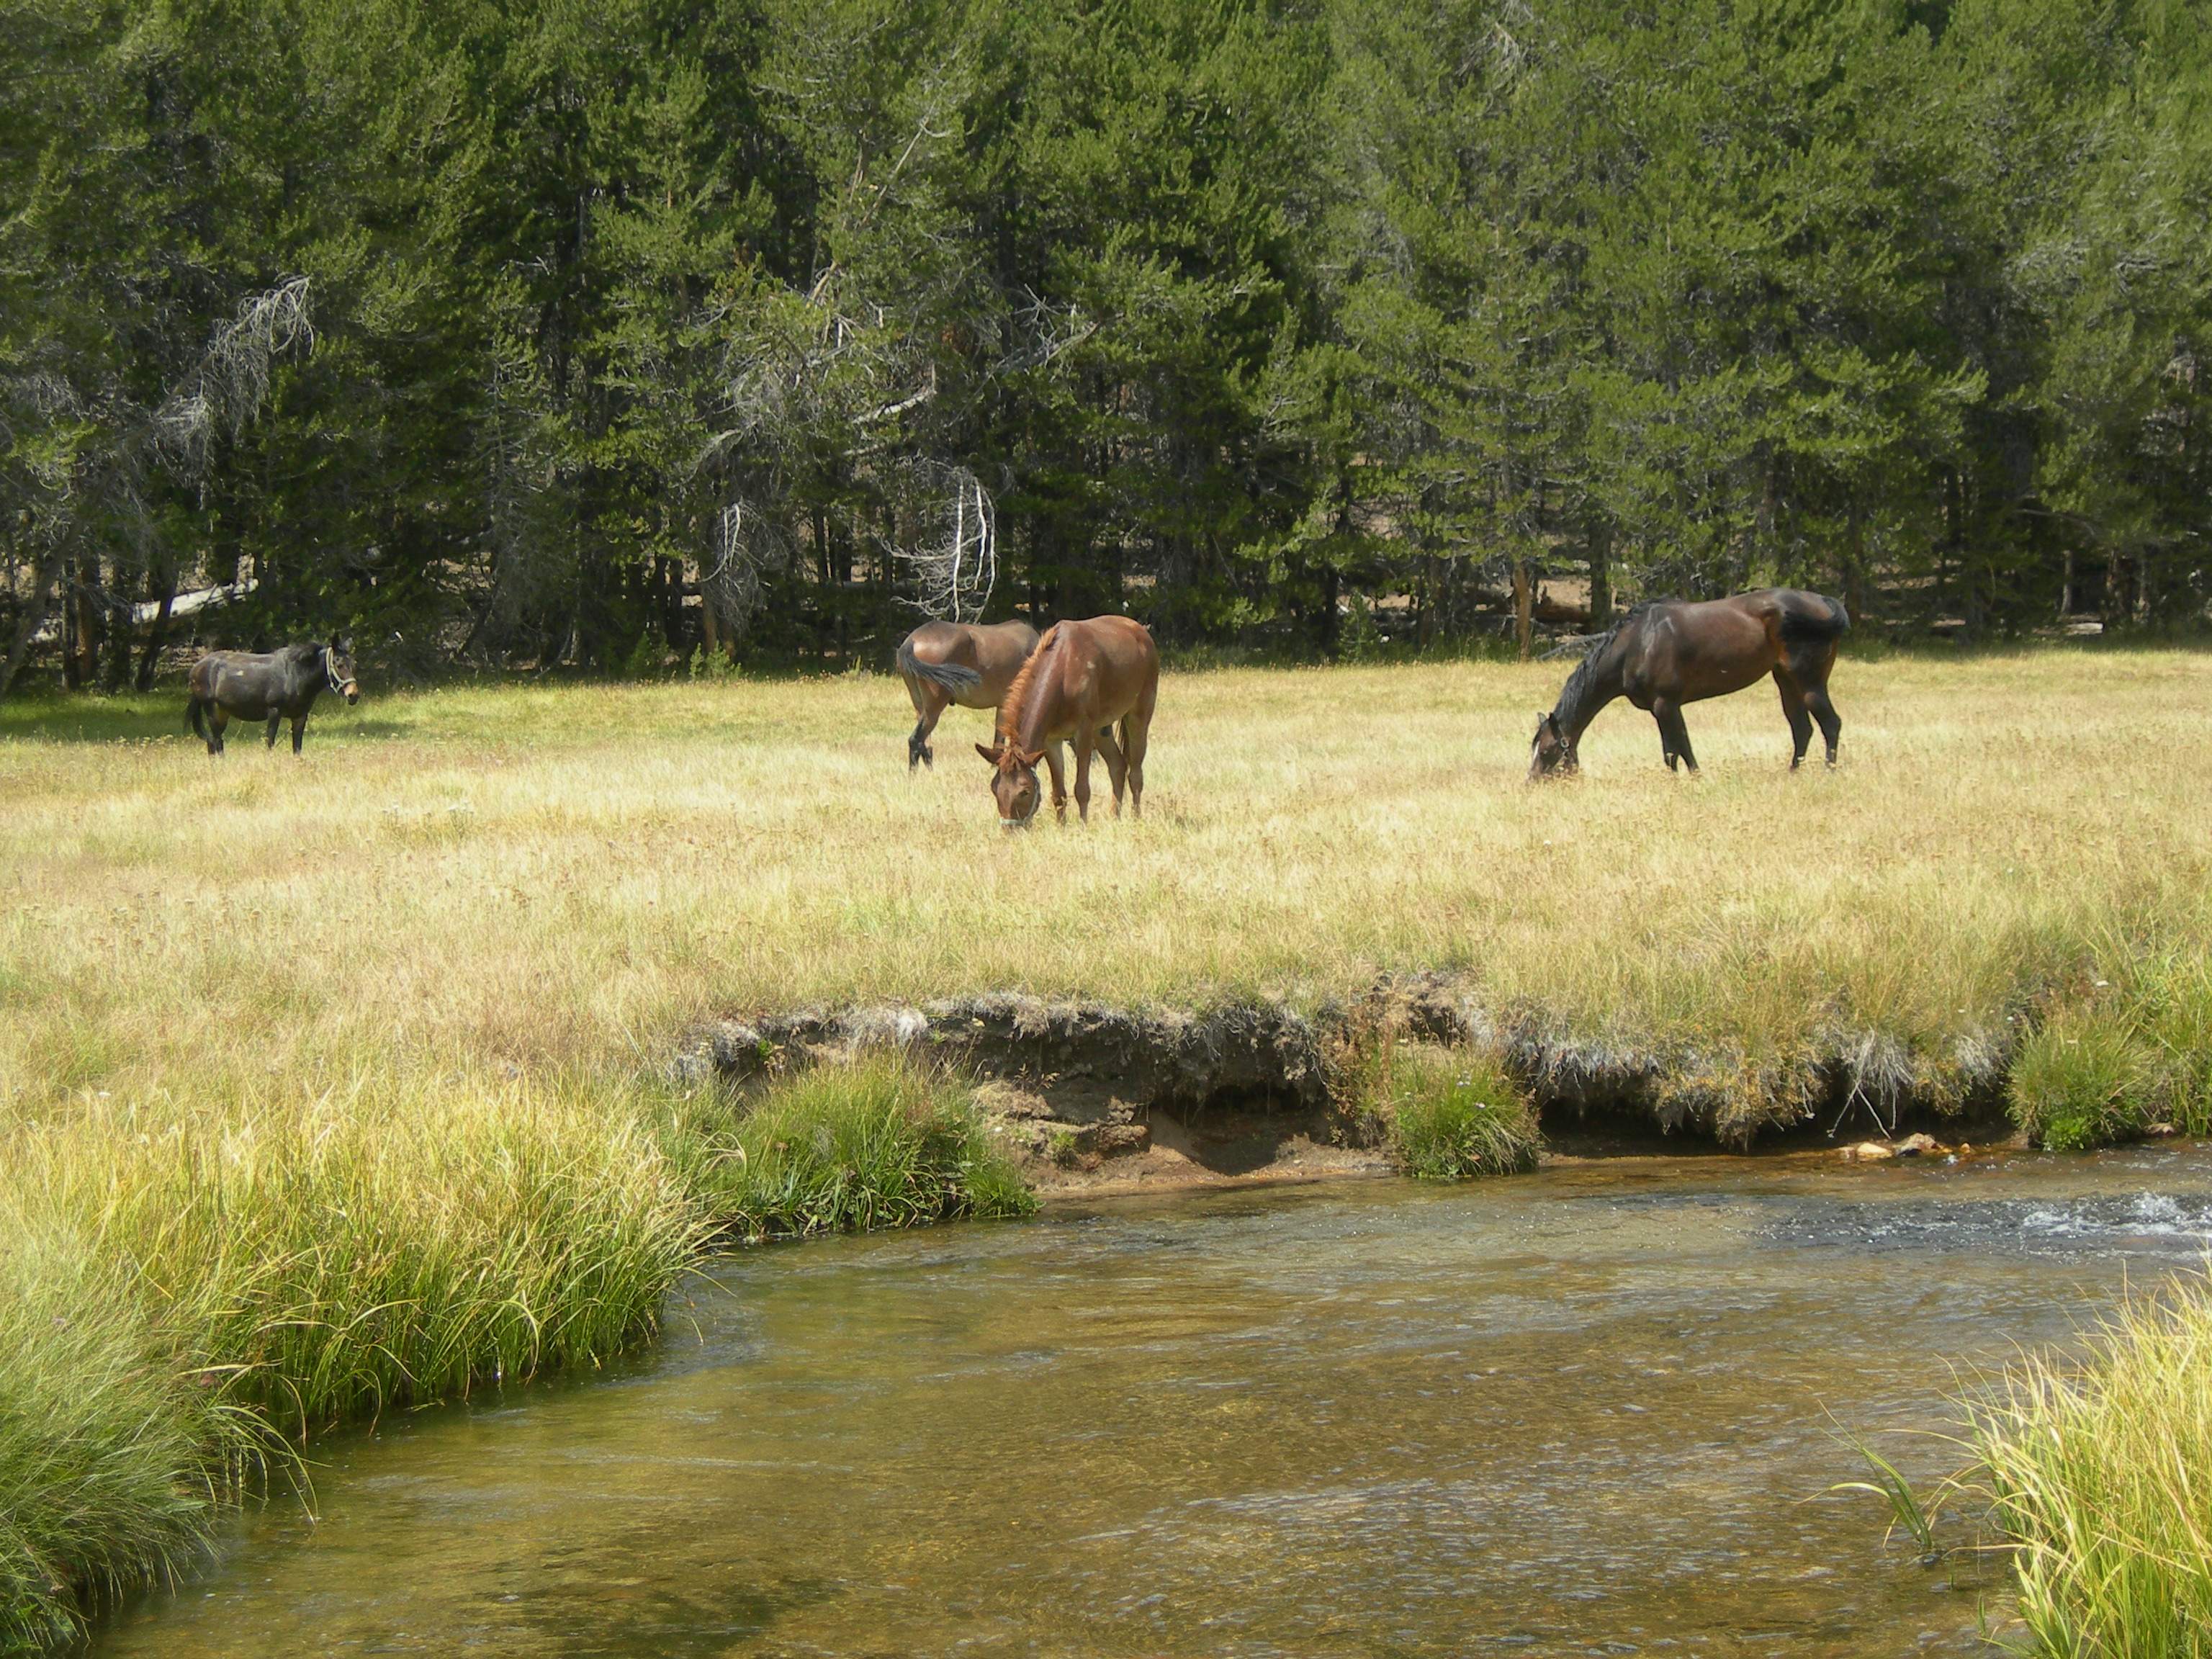 mules in a meadow by water